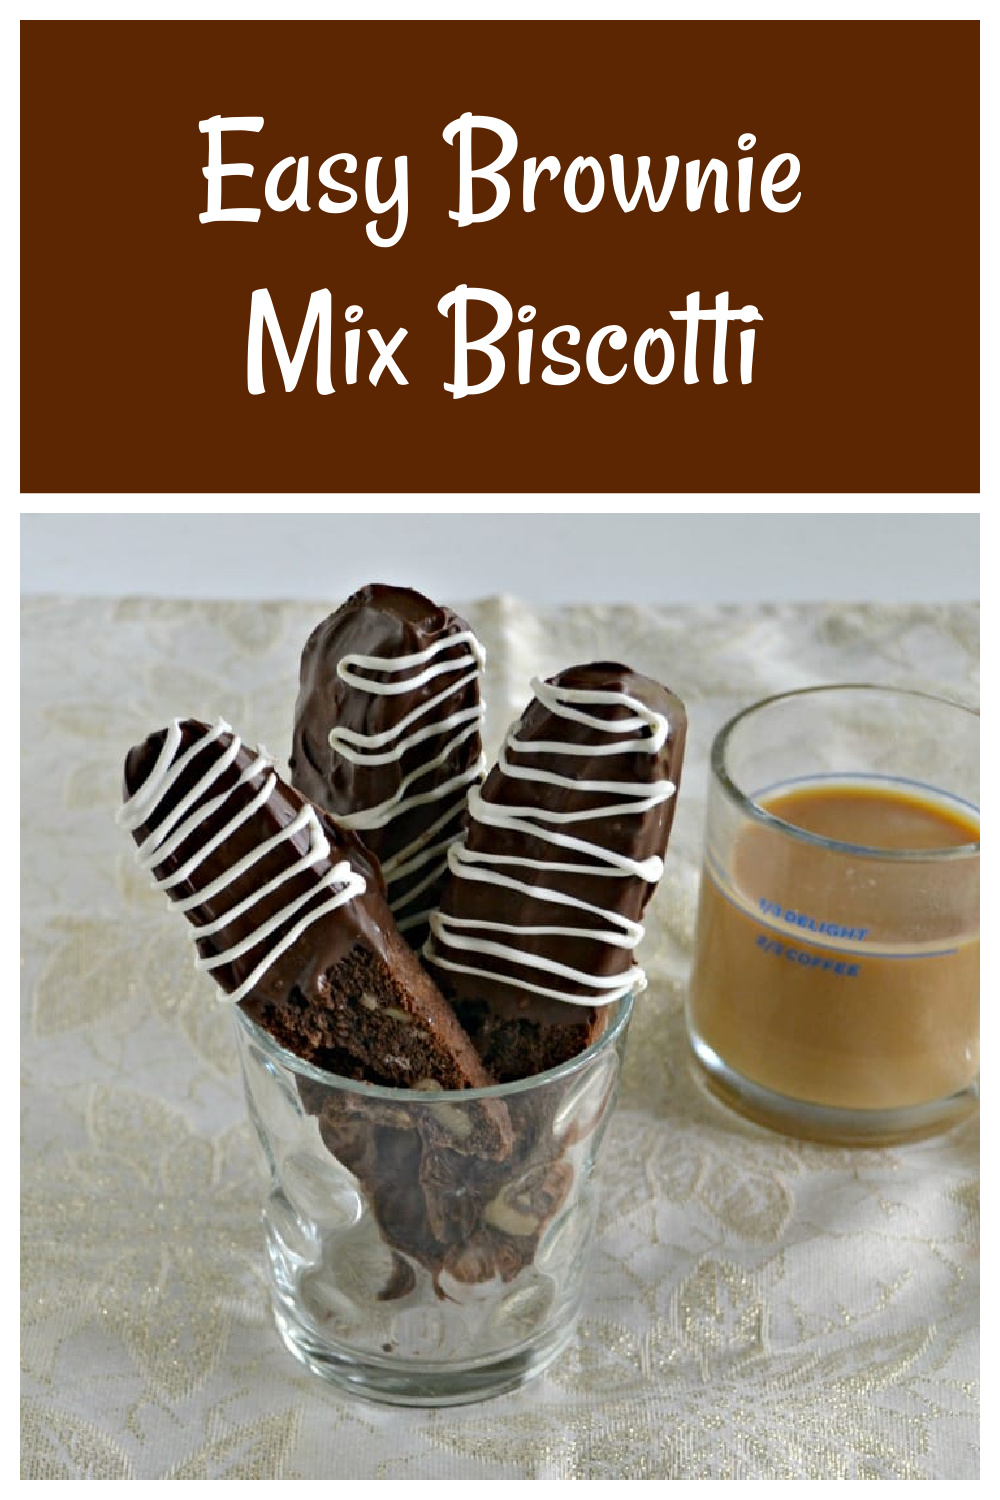 Pin Image:  Text title, a cup of chocolate dipped biscotti with a mug of coffee behind it. 